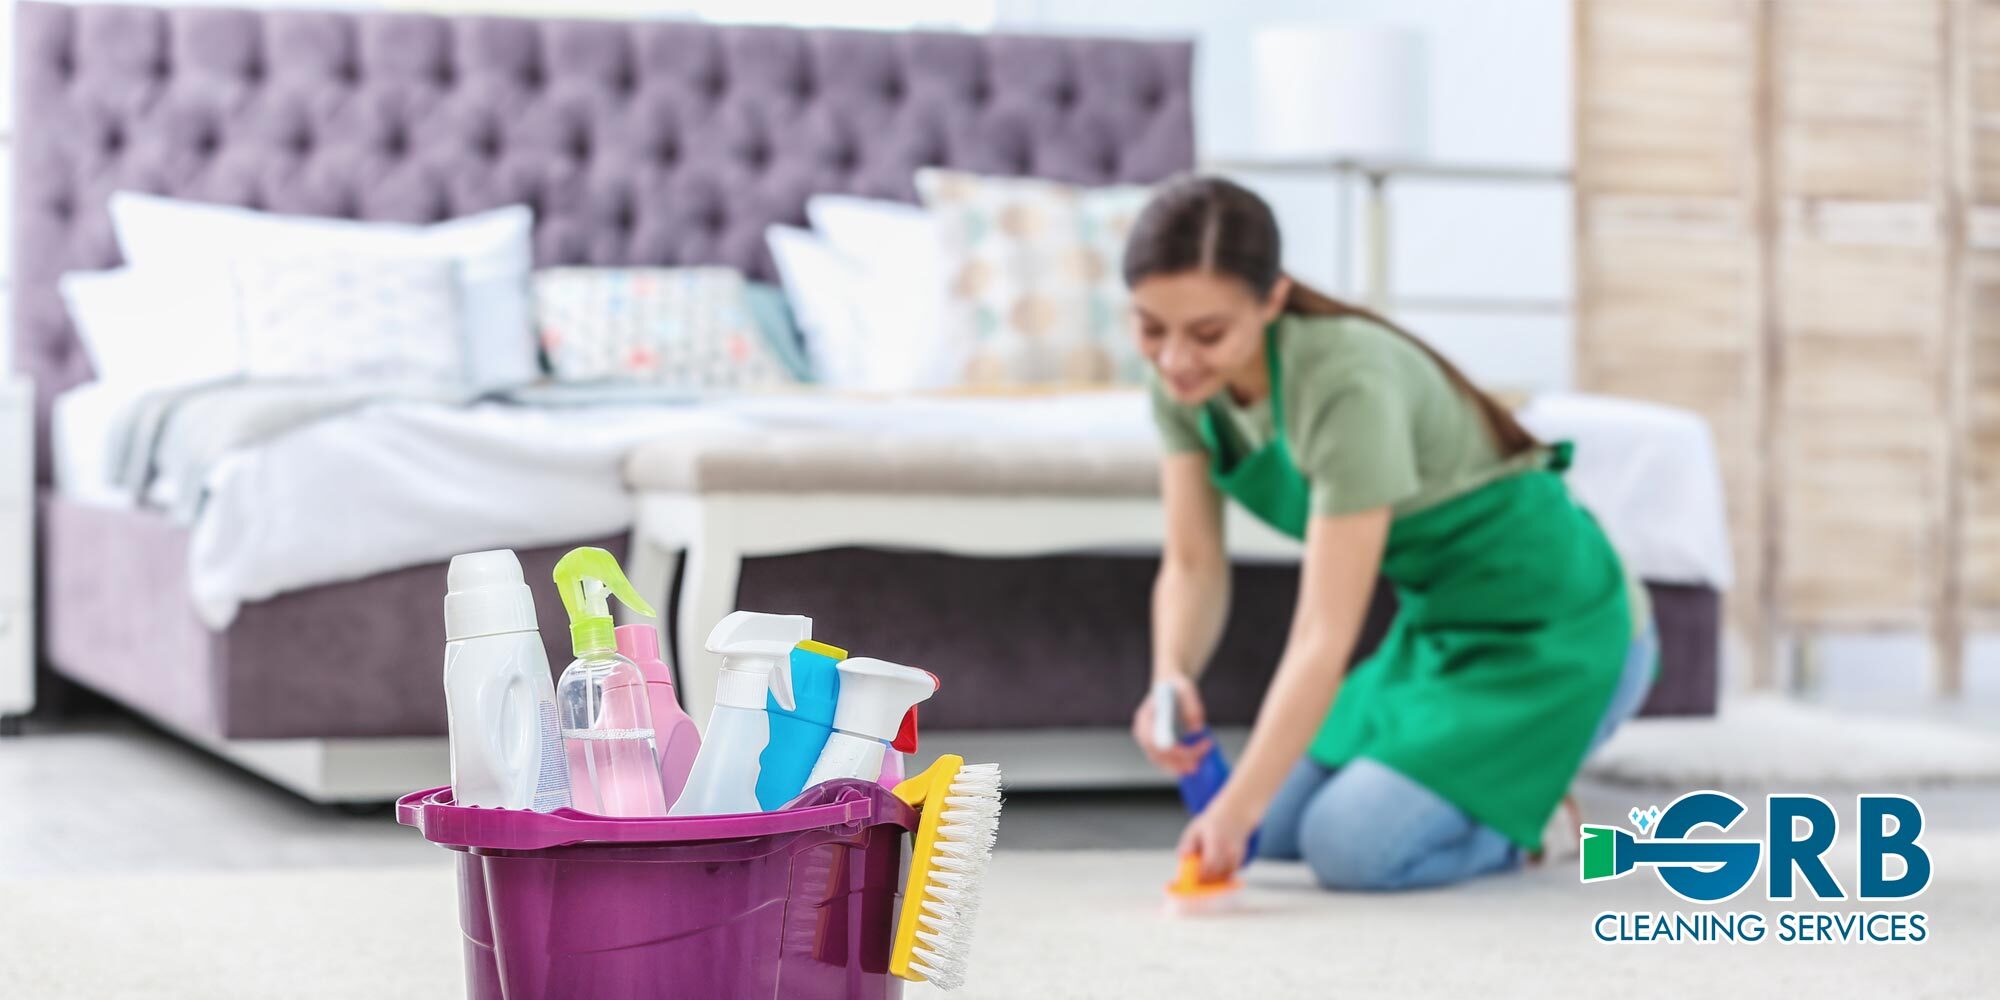 Bedroom Cleaning Service - GRB Cleaning Services